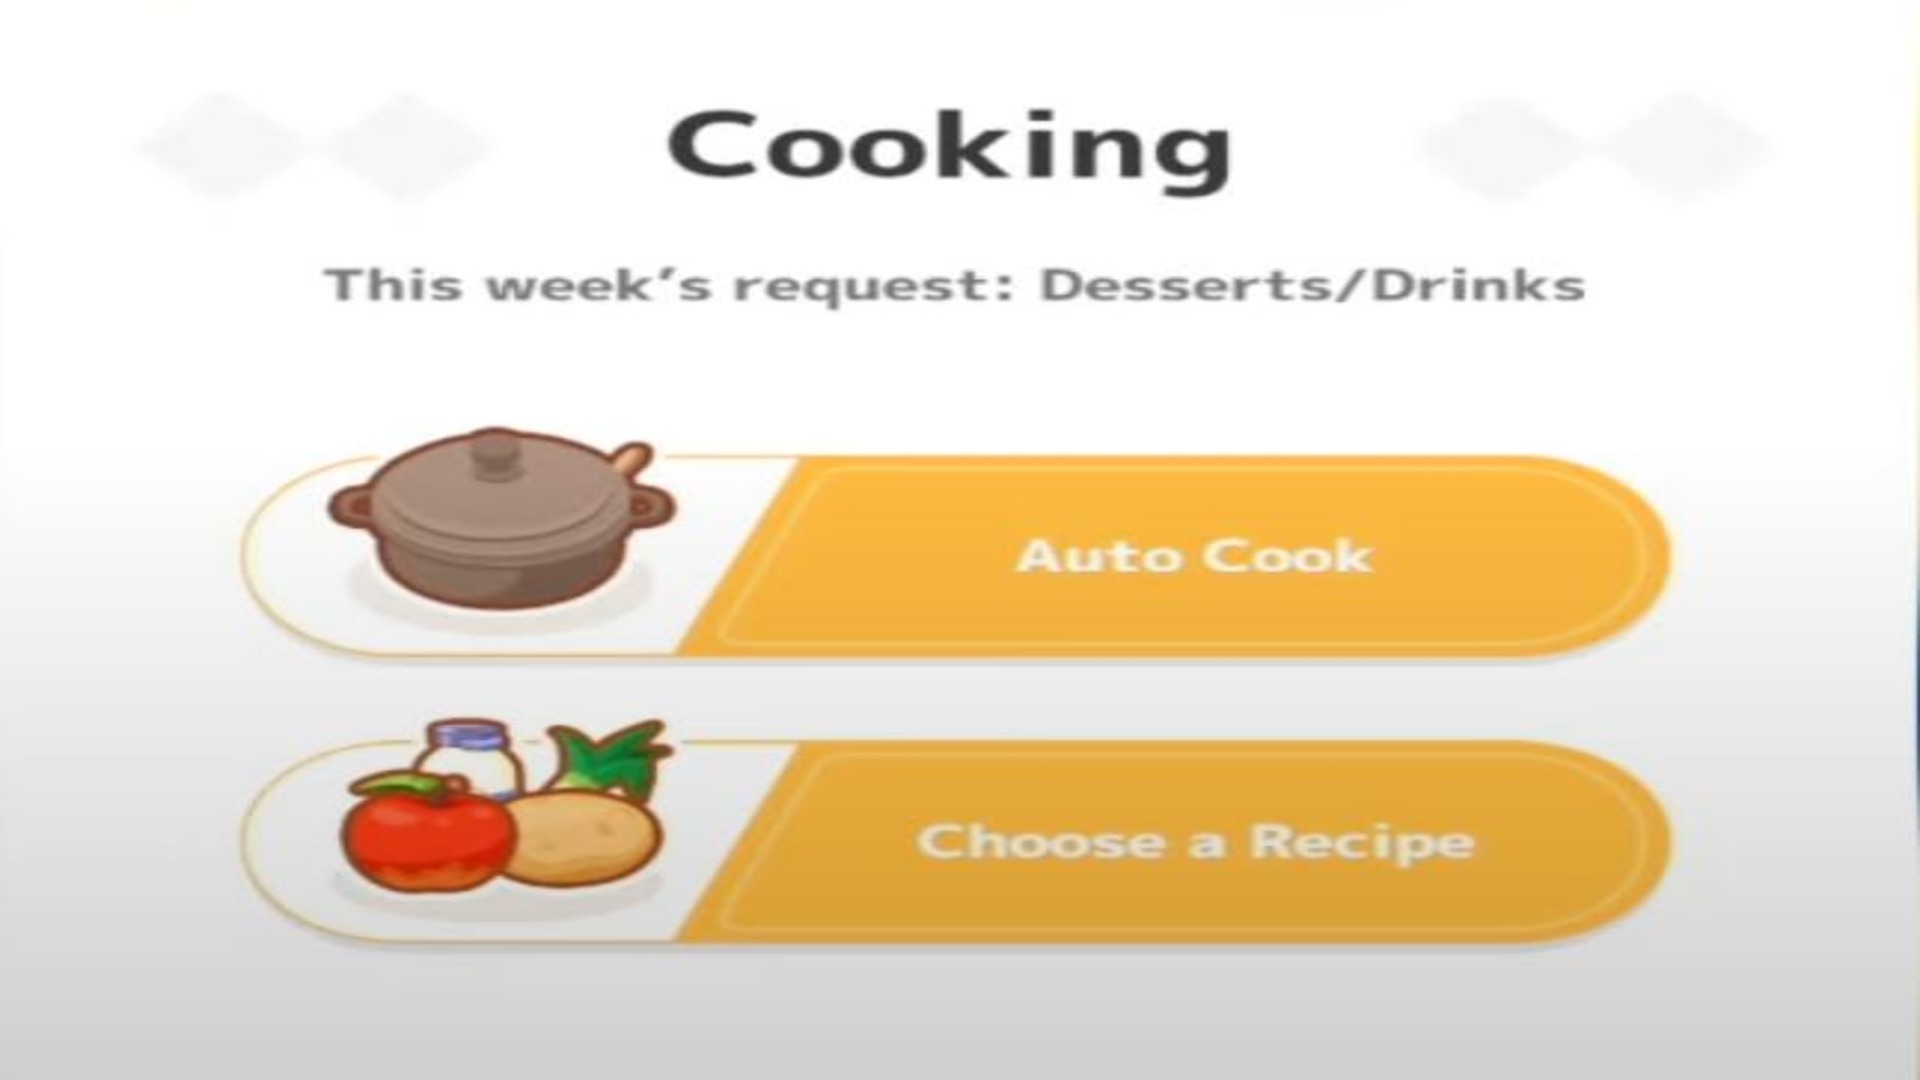 If you're lazy, you can always Auto Cook!